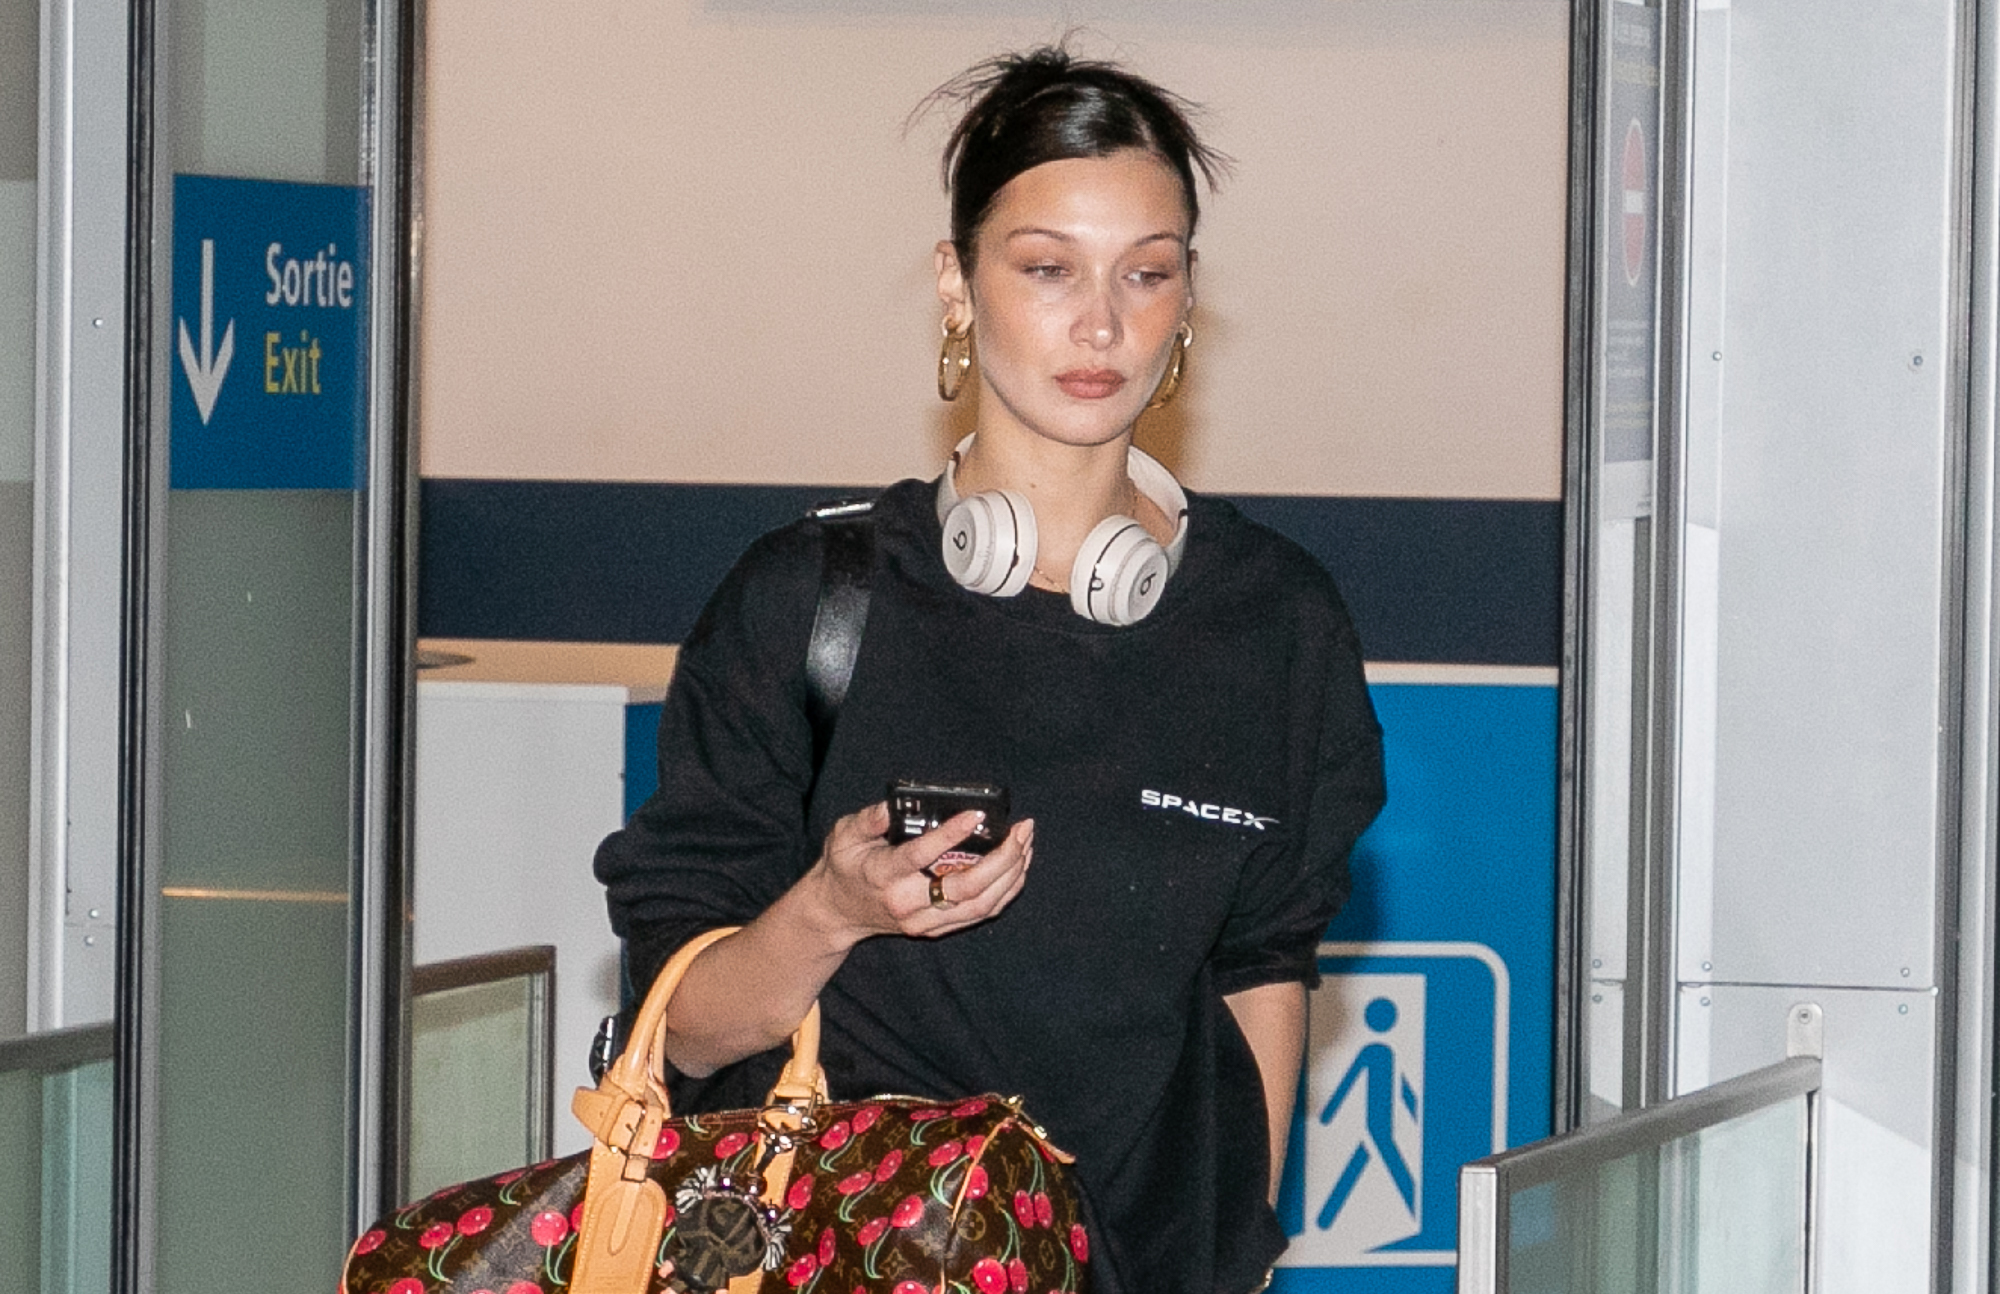 Stylish Women Have Brought One Thing to the Airport for Decades  Louis  vuitton duffle bag, Louis vuitton, Celebrity airport style